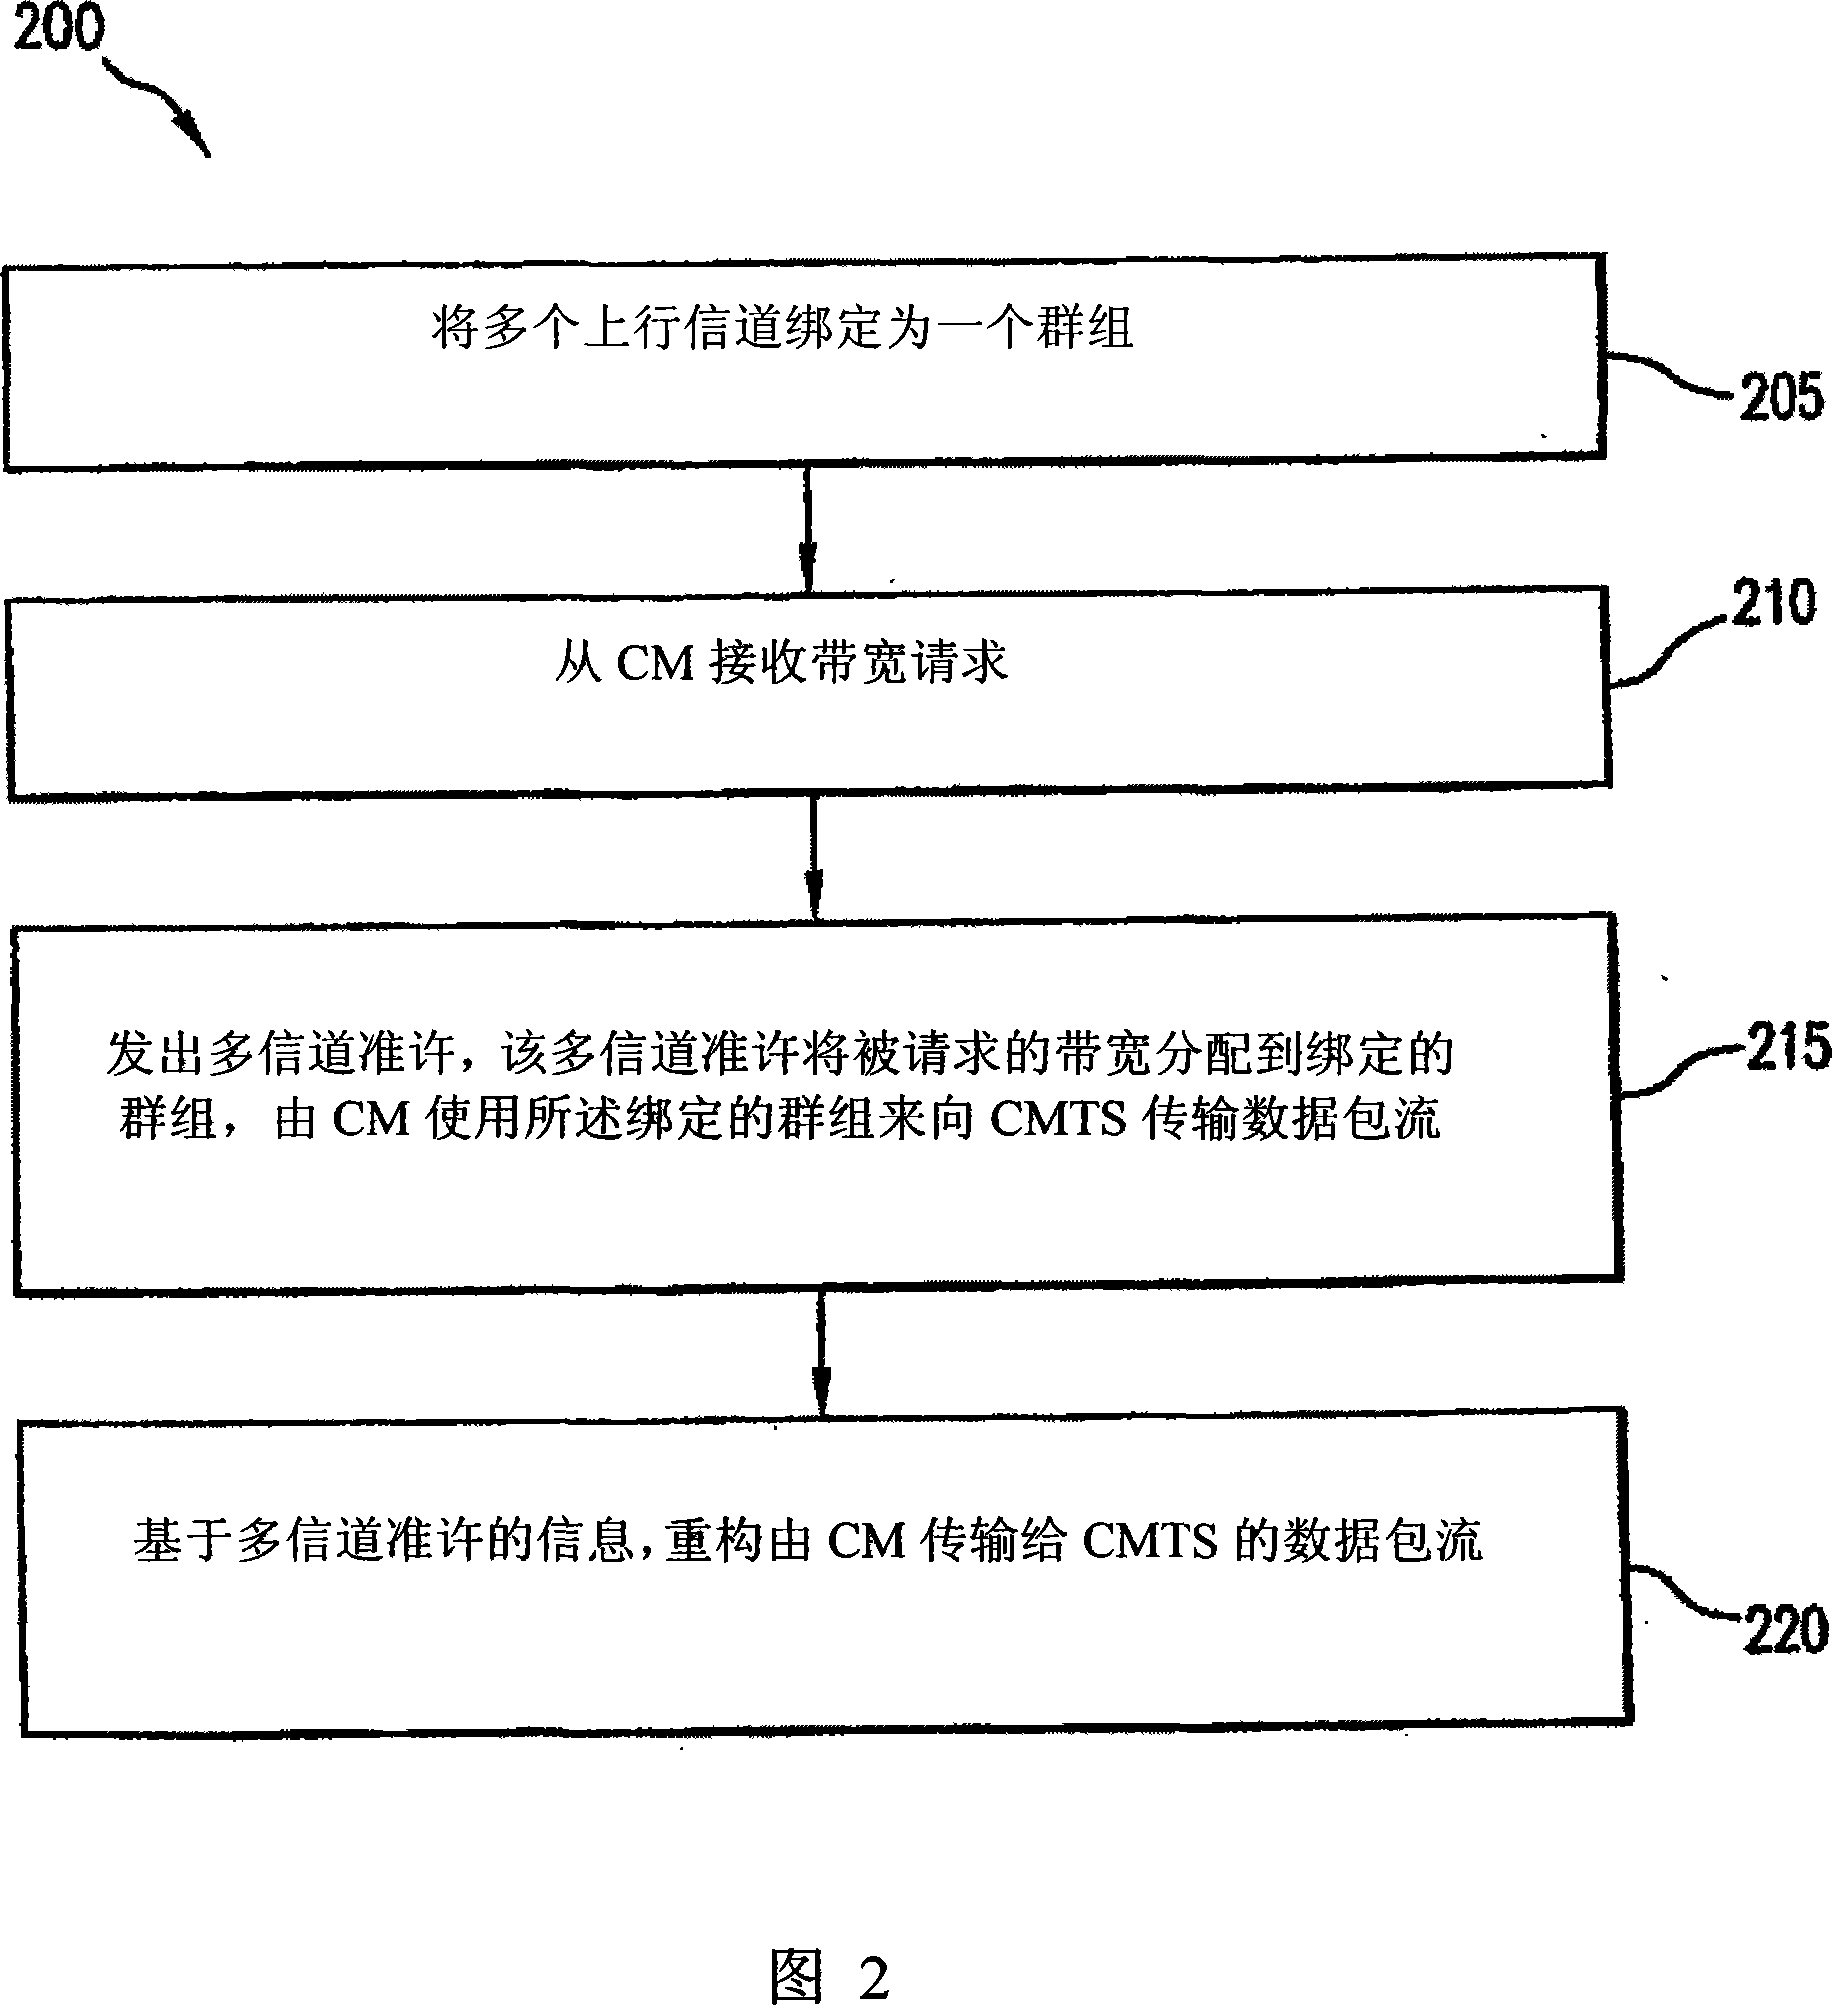 Upstream channel bonding in a cable communications system